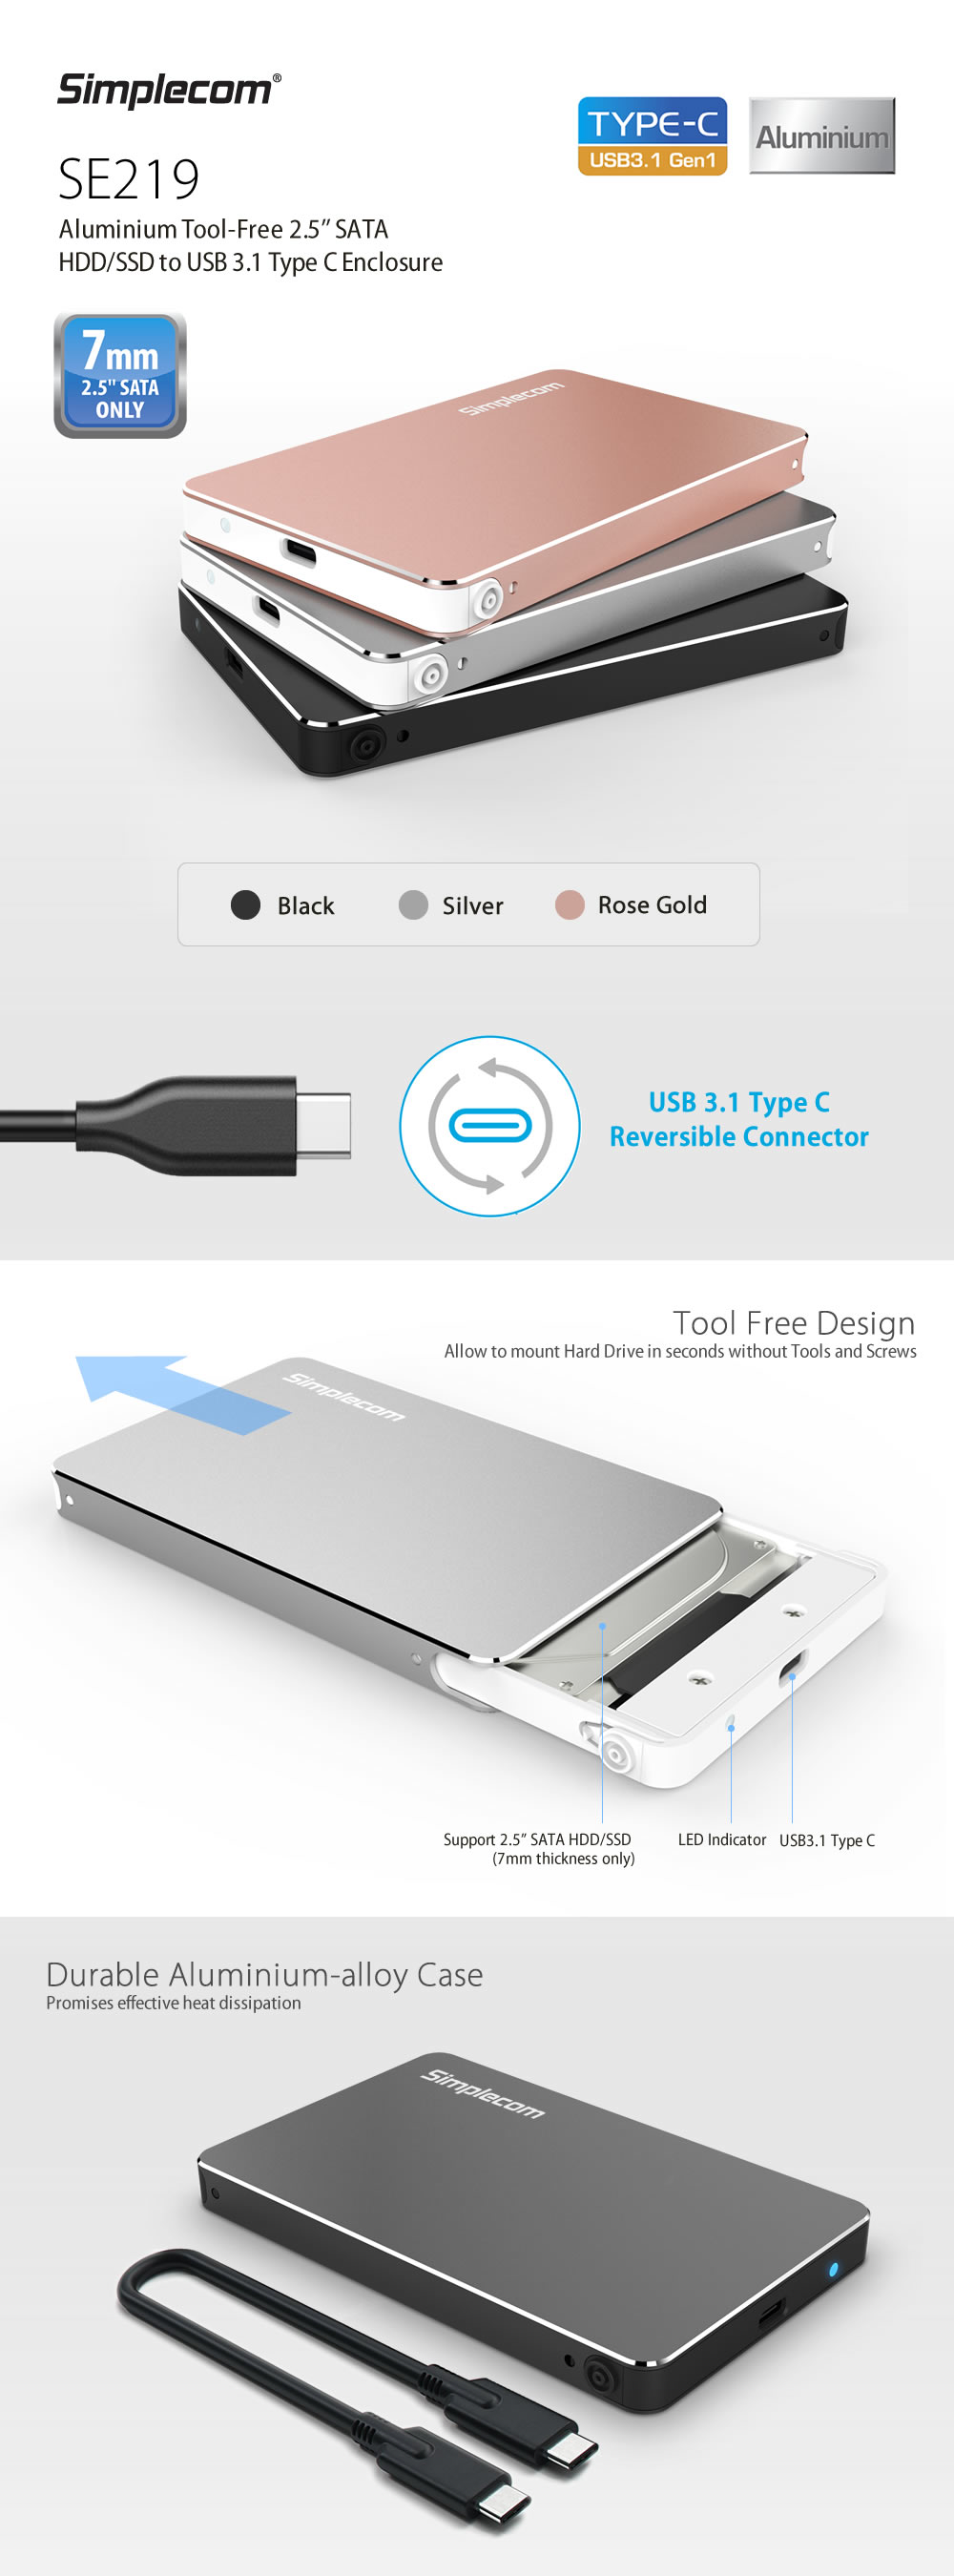 A large marketing image providing additional information about the product Simplecom SE219 Aluminium Tool-Free 2.5" SATA HDD/SSD USB-C Enclosure - Additional alt info not provided